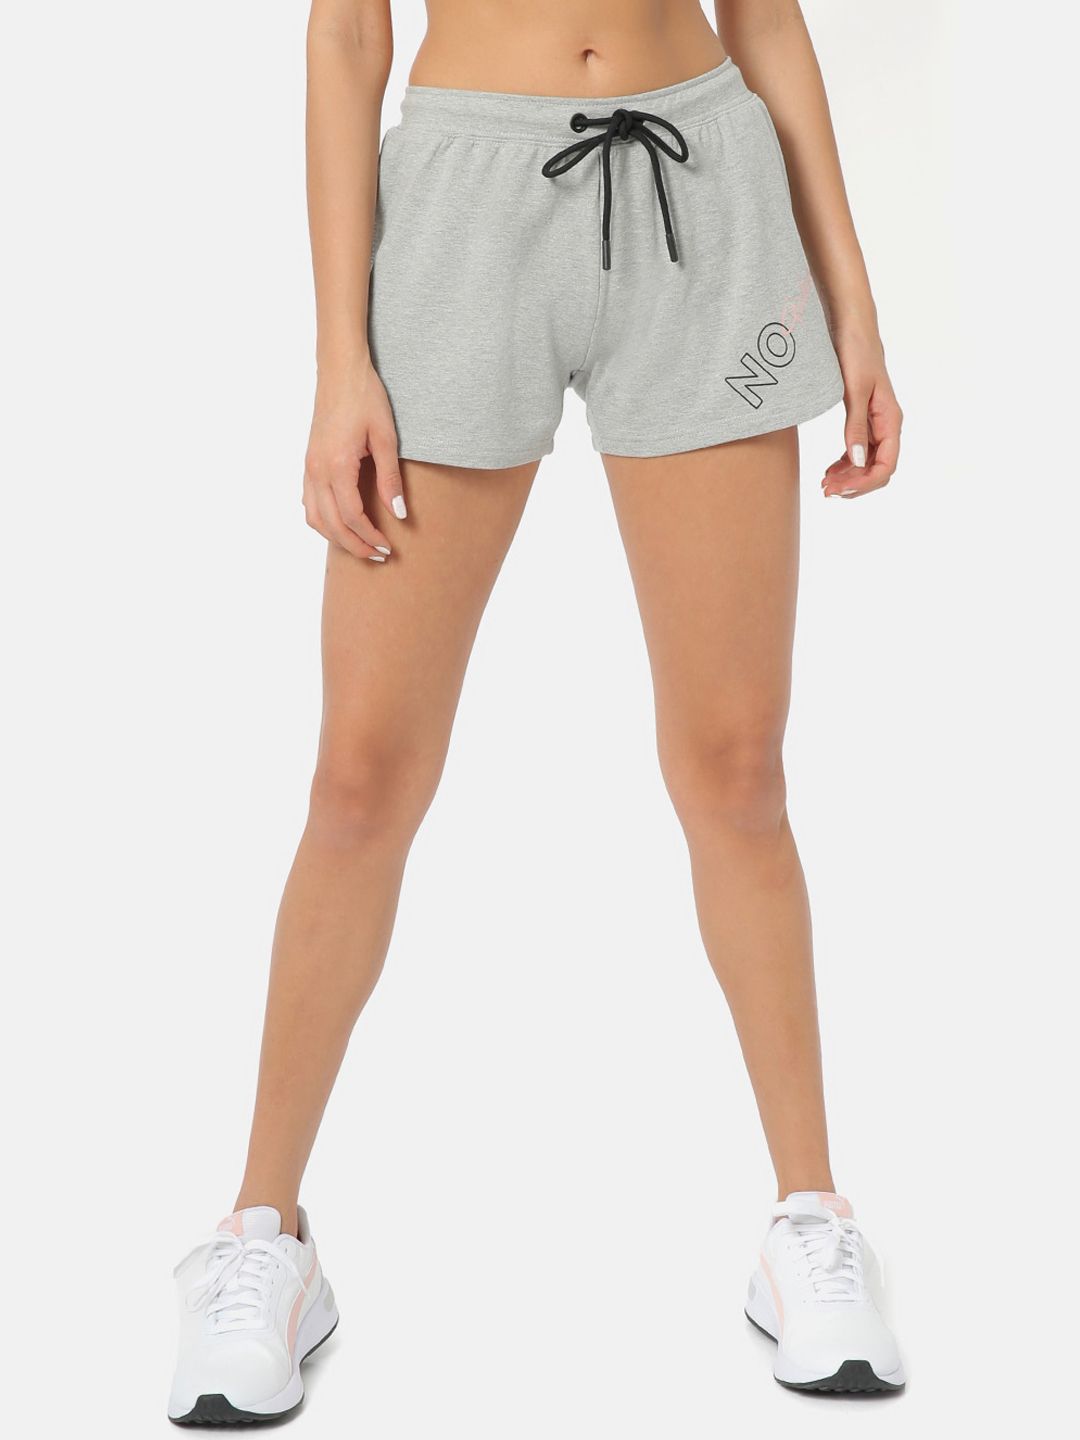 Cultsport Women Grey Printed Regular Fit Sports Shorts Price in India